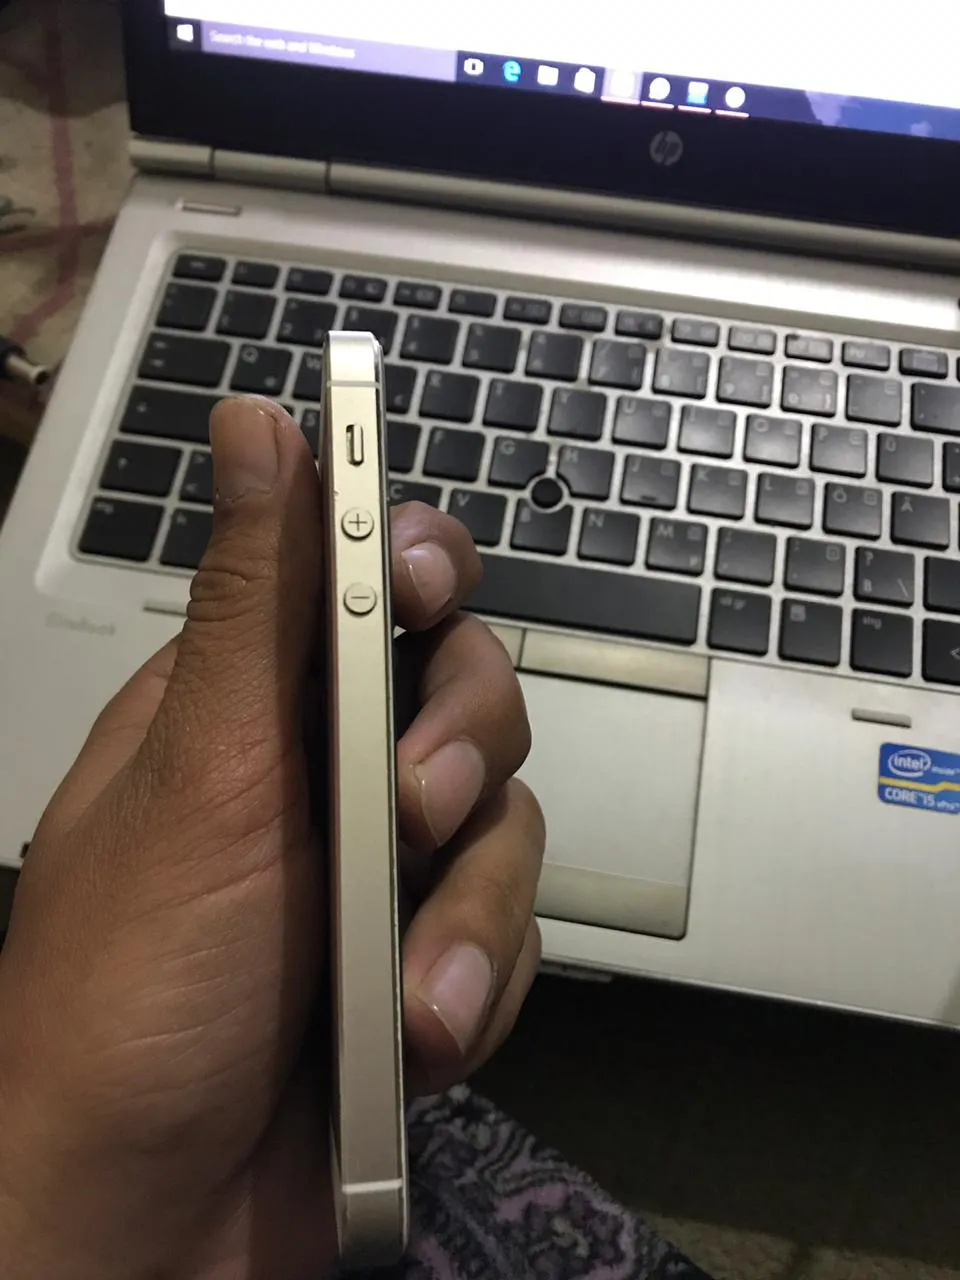 iphone 5s 9/10 condition for sale - photo 4